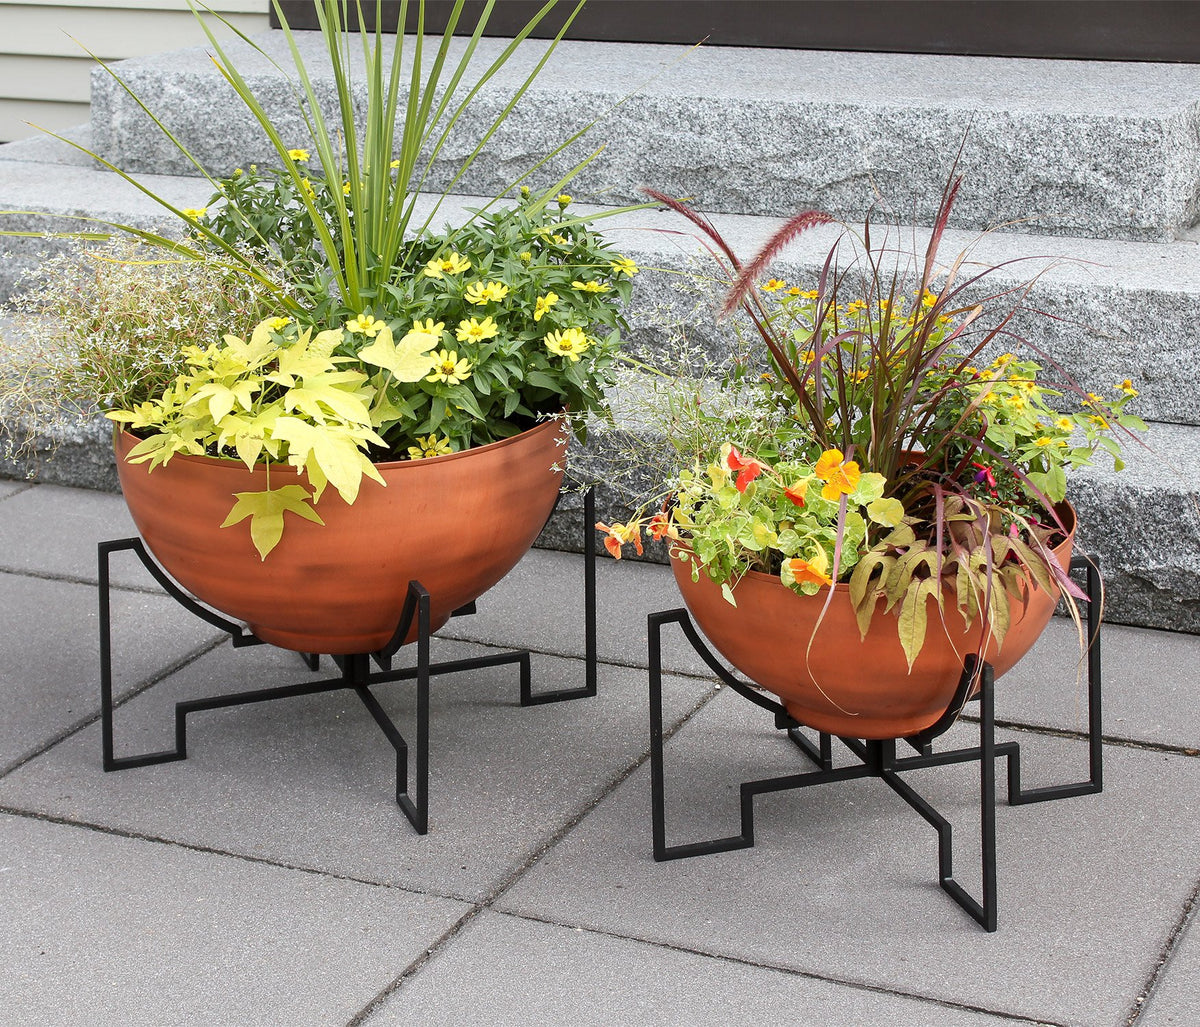 Jane Planters with Steel Patina Bowls Planters with Bowls